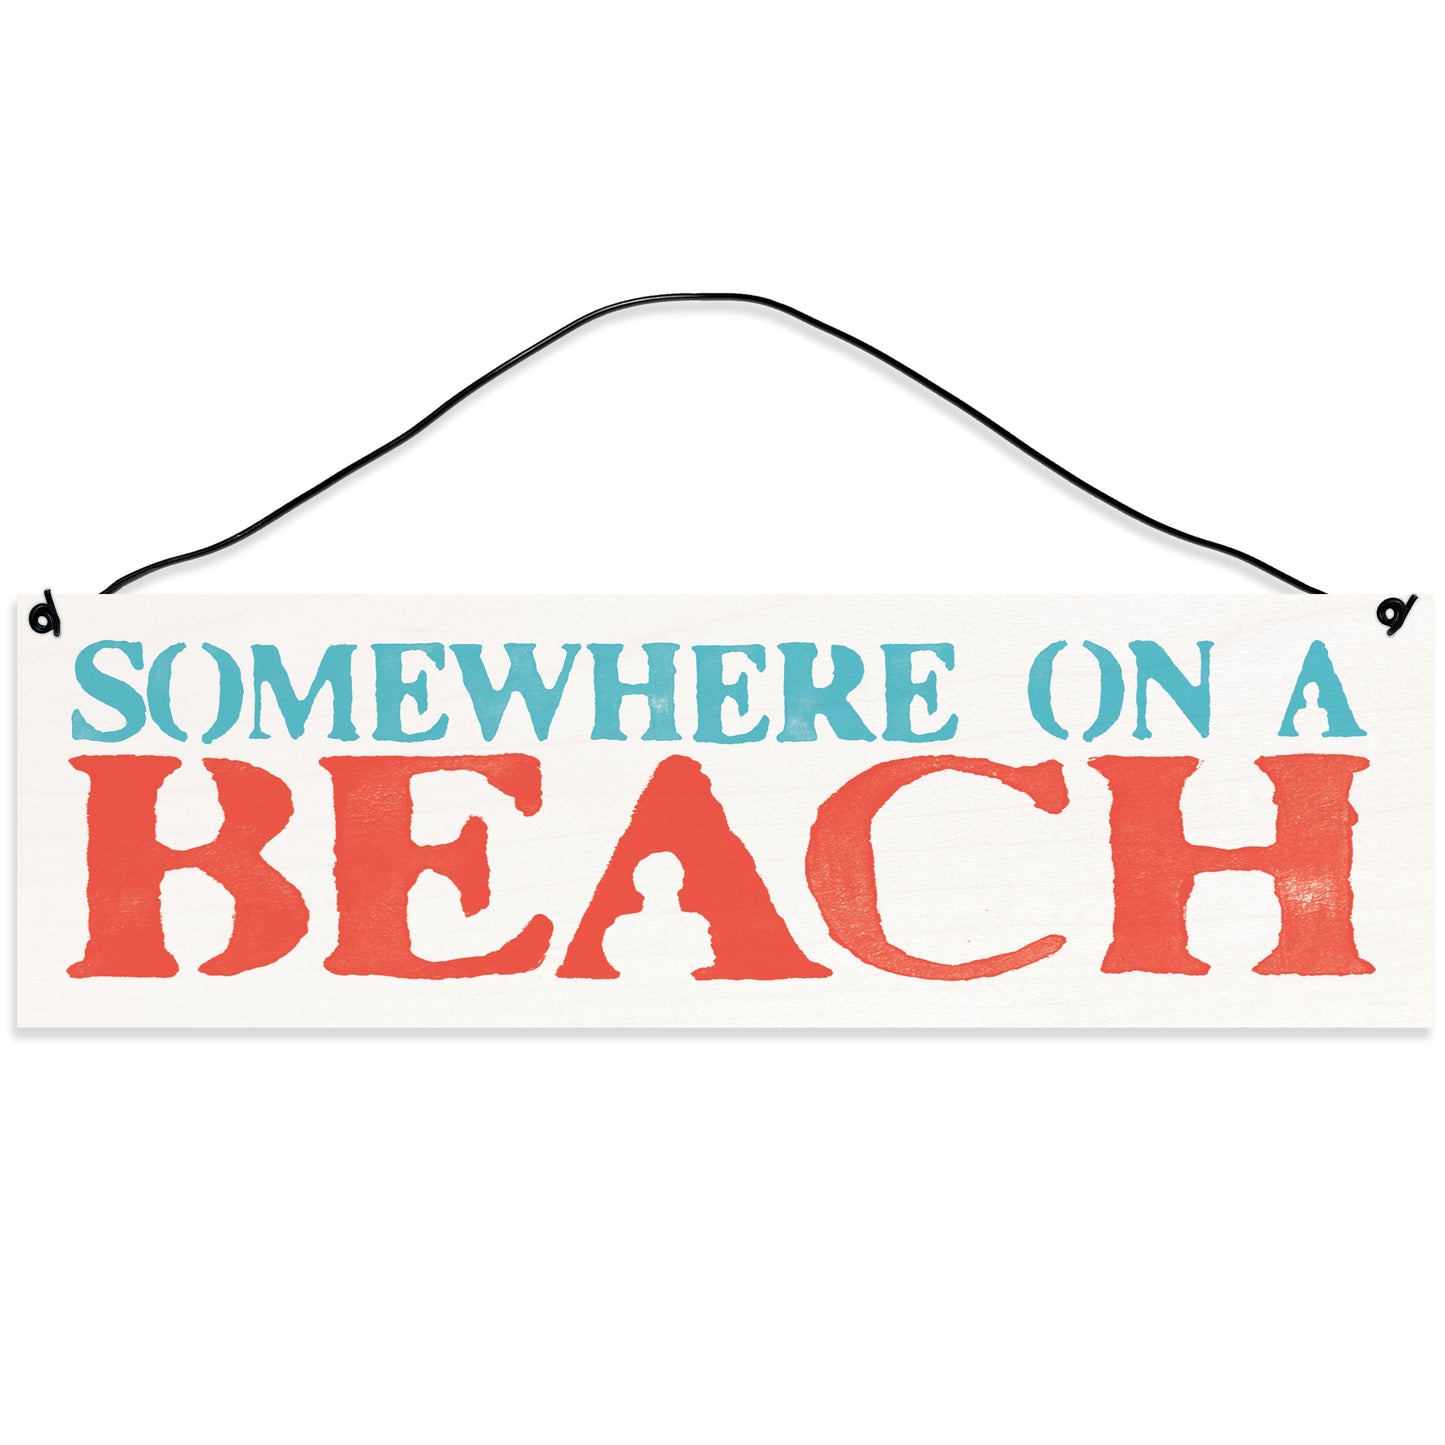 Sawyer's Mill - Somewhere On A Beach. Wood Sign for Home or Office. Measures 3x10 inches.